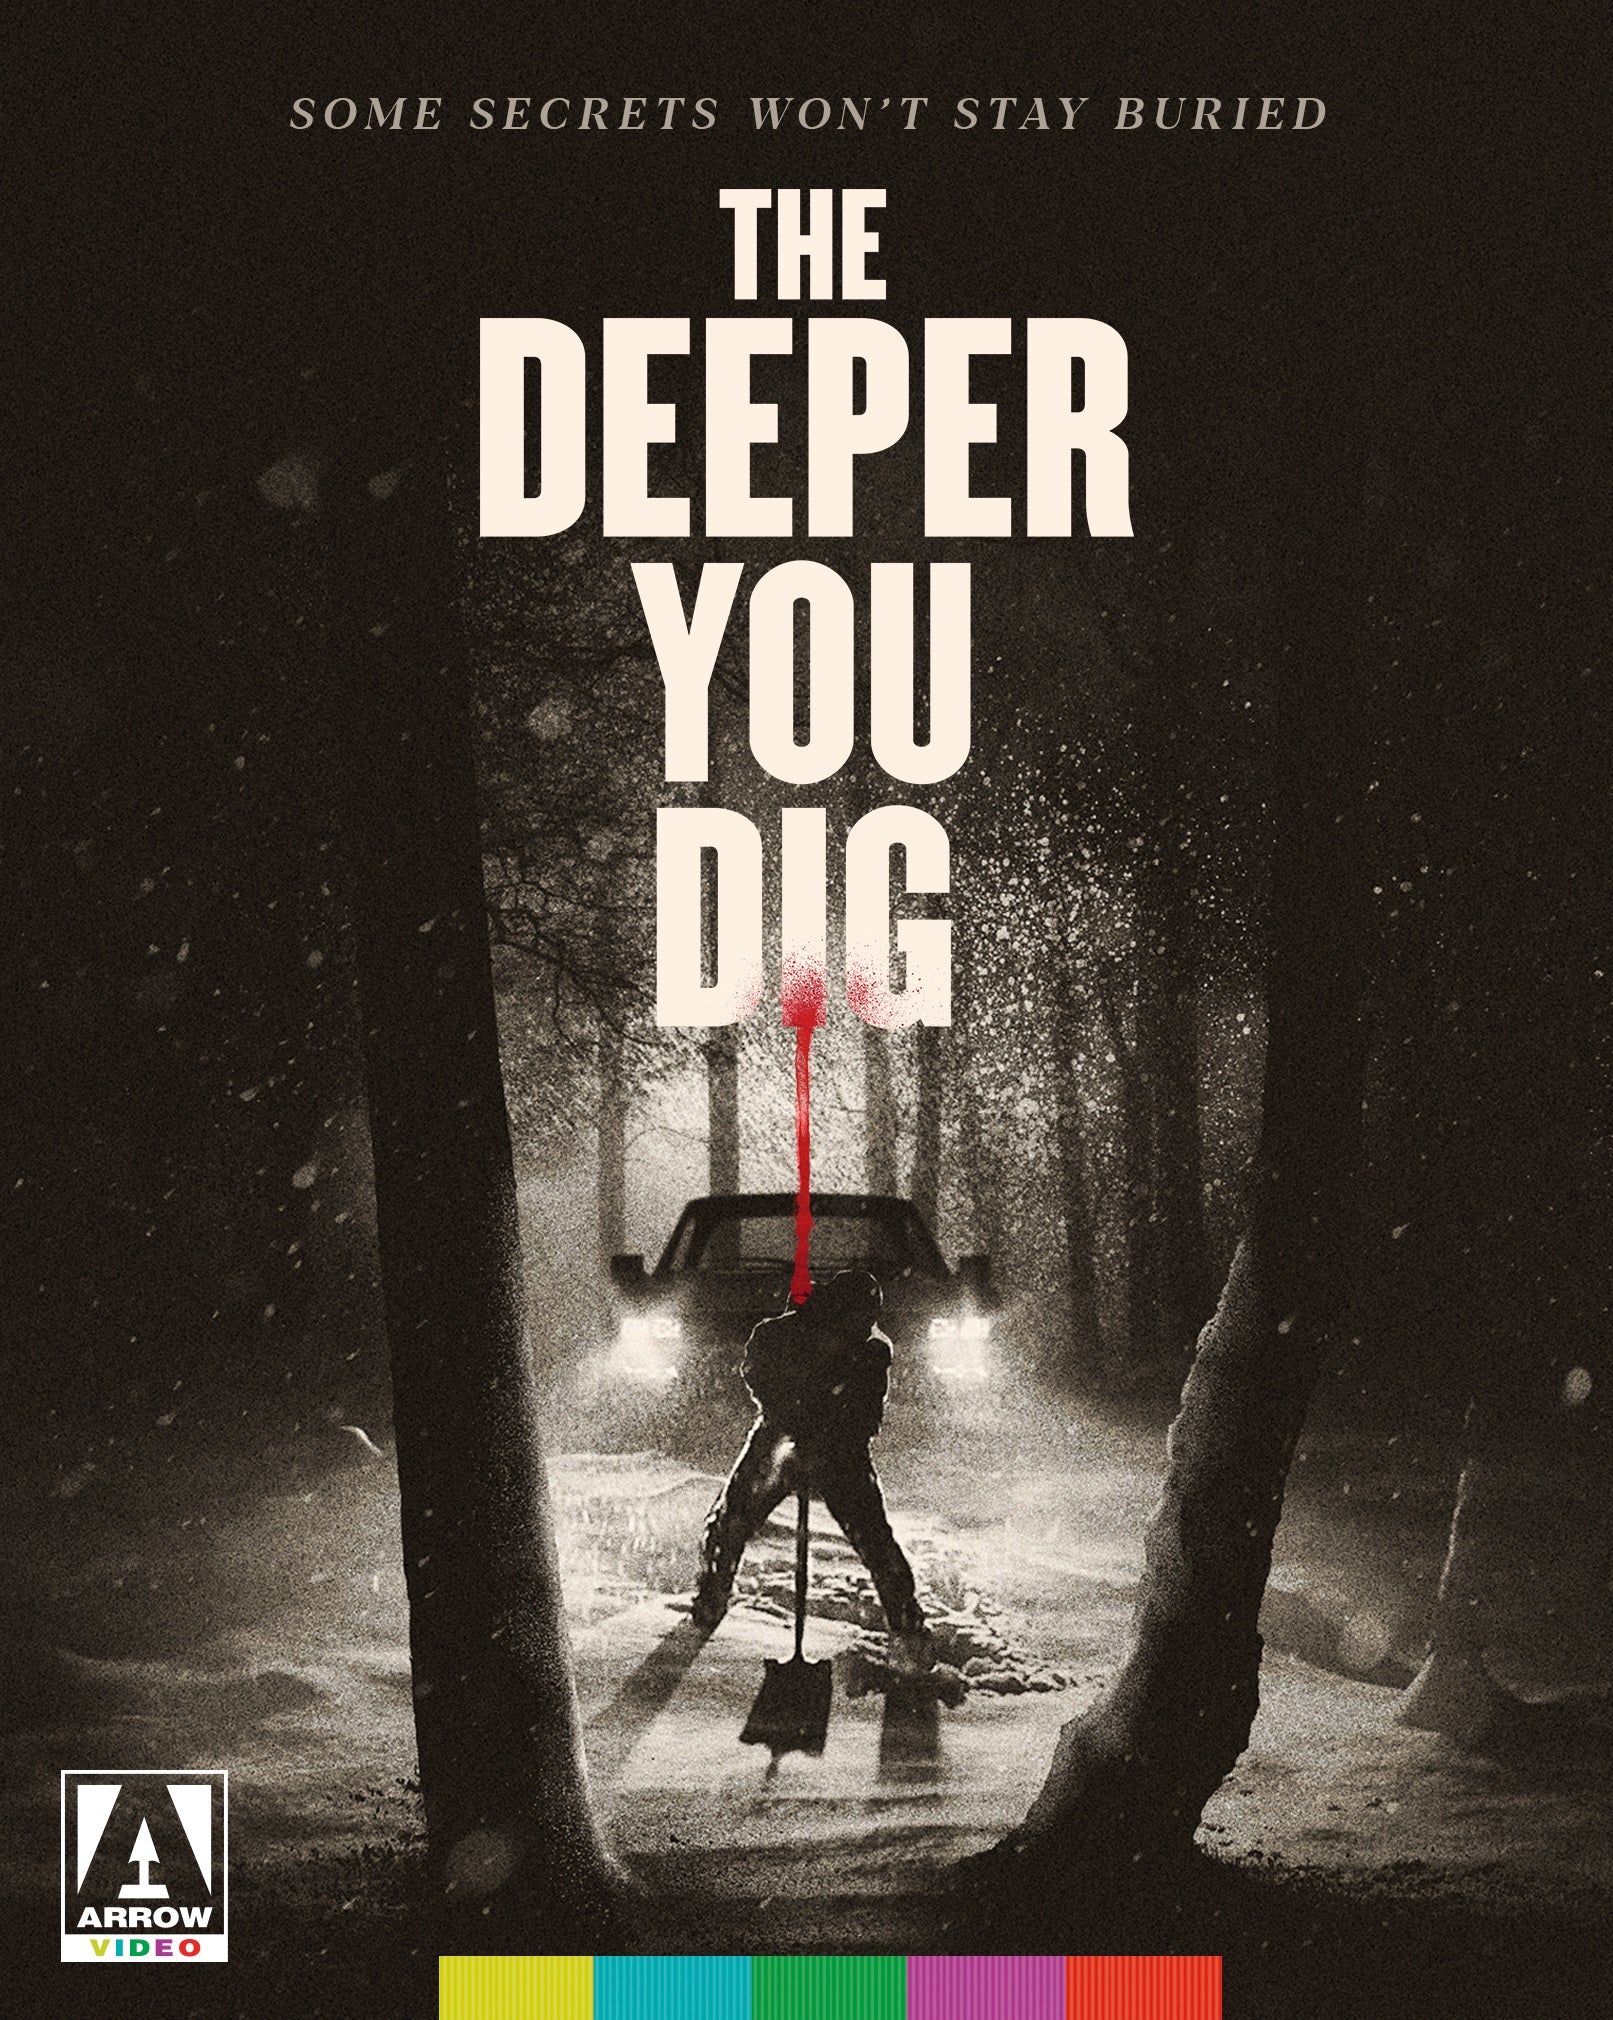 The Deeper You Dig (Limited Edition) Blu-Ray Blu-Ray